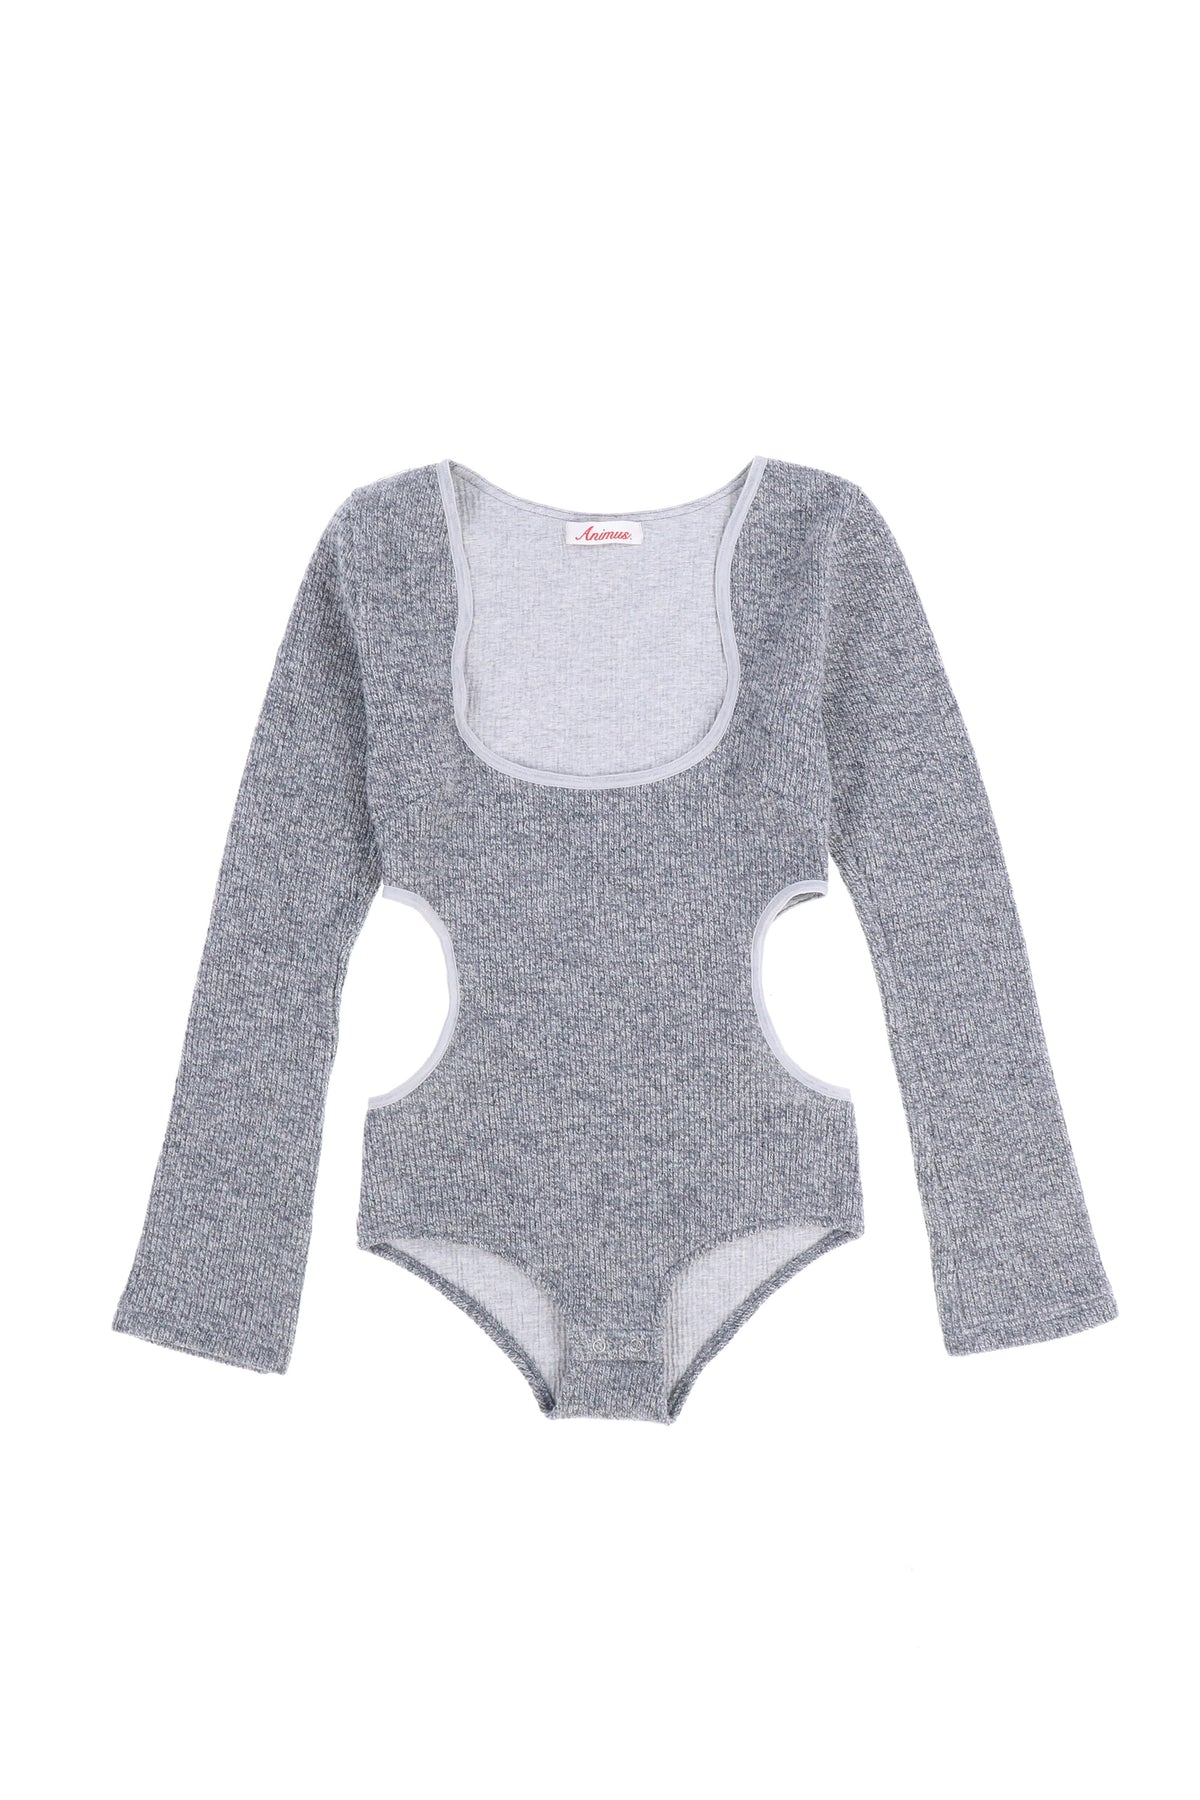 BODY SUITE BY KNITTING / GRY